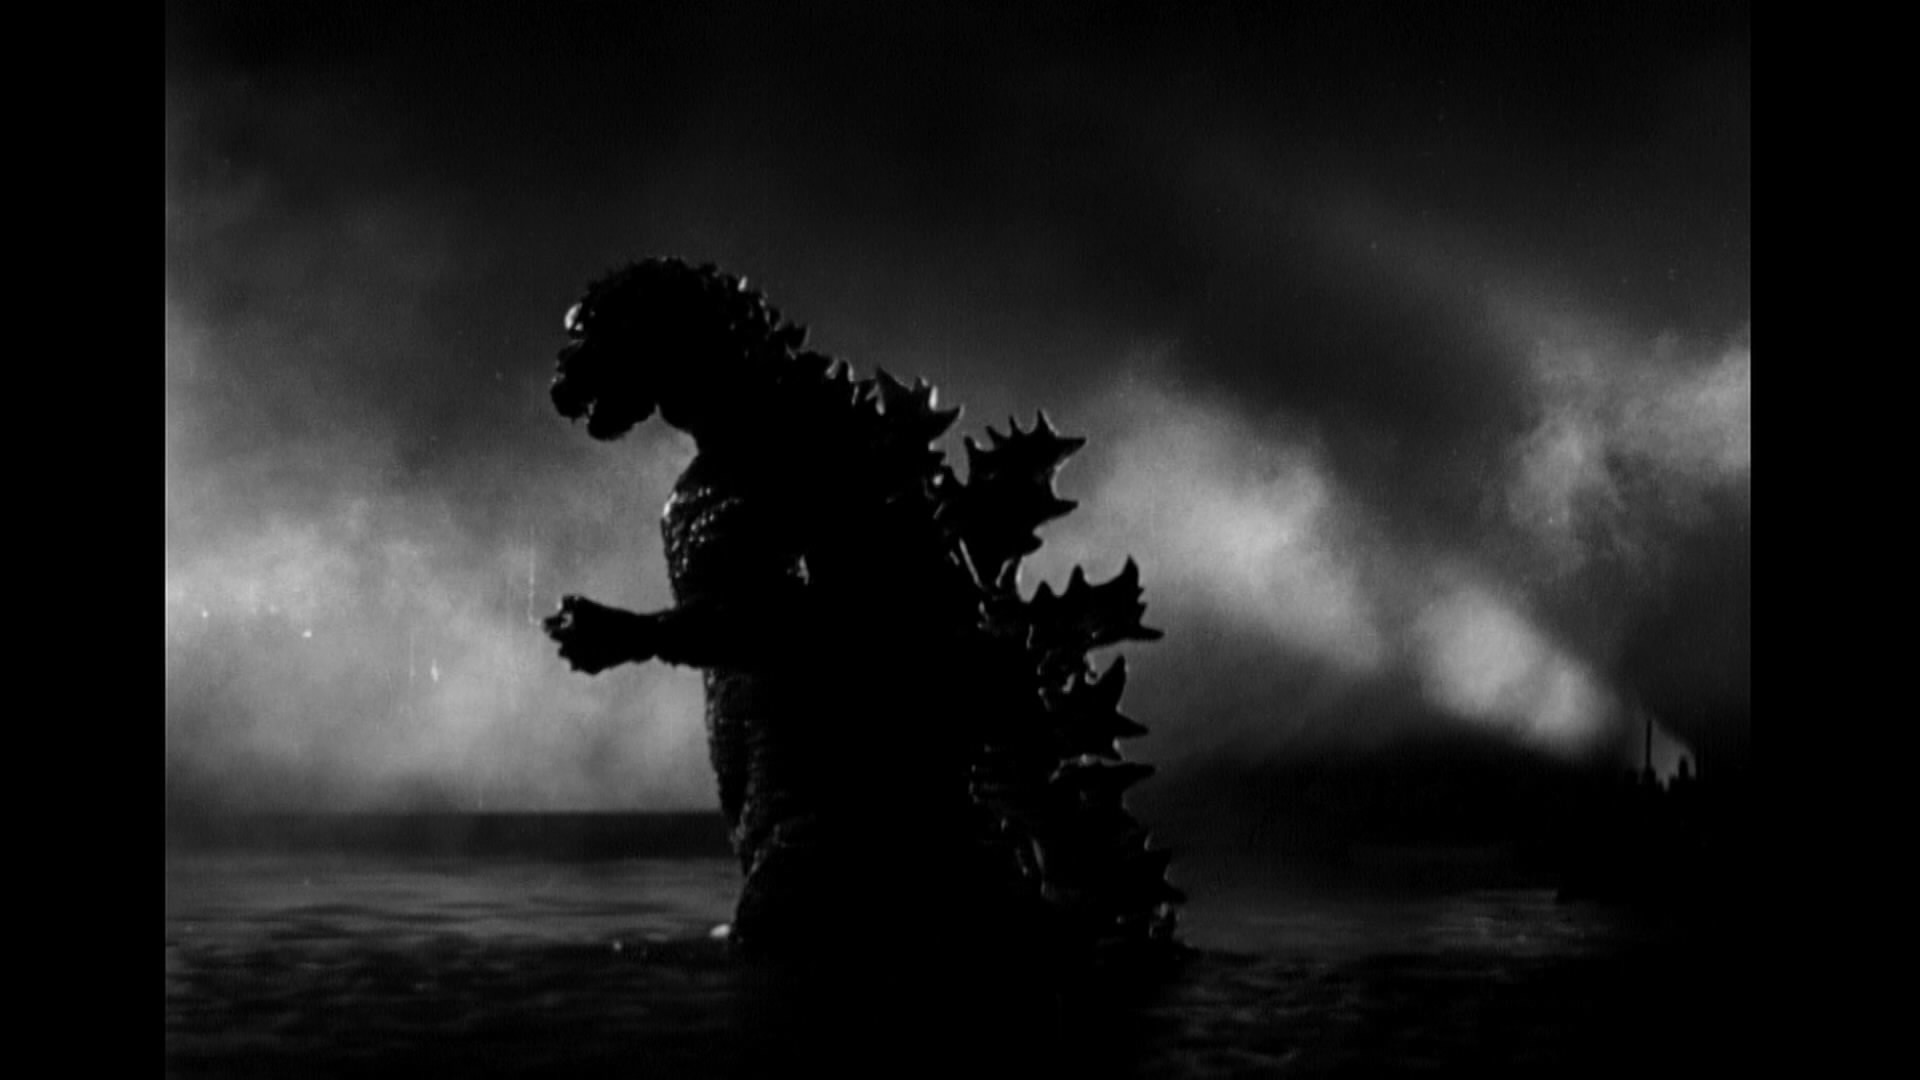 1920x1080 Godzilla 1954 Wallpaper Traditional as in 1954 style 